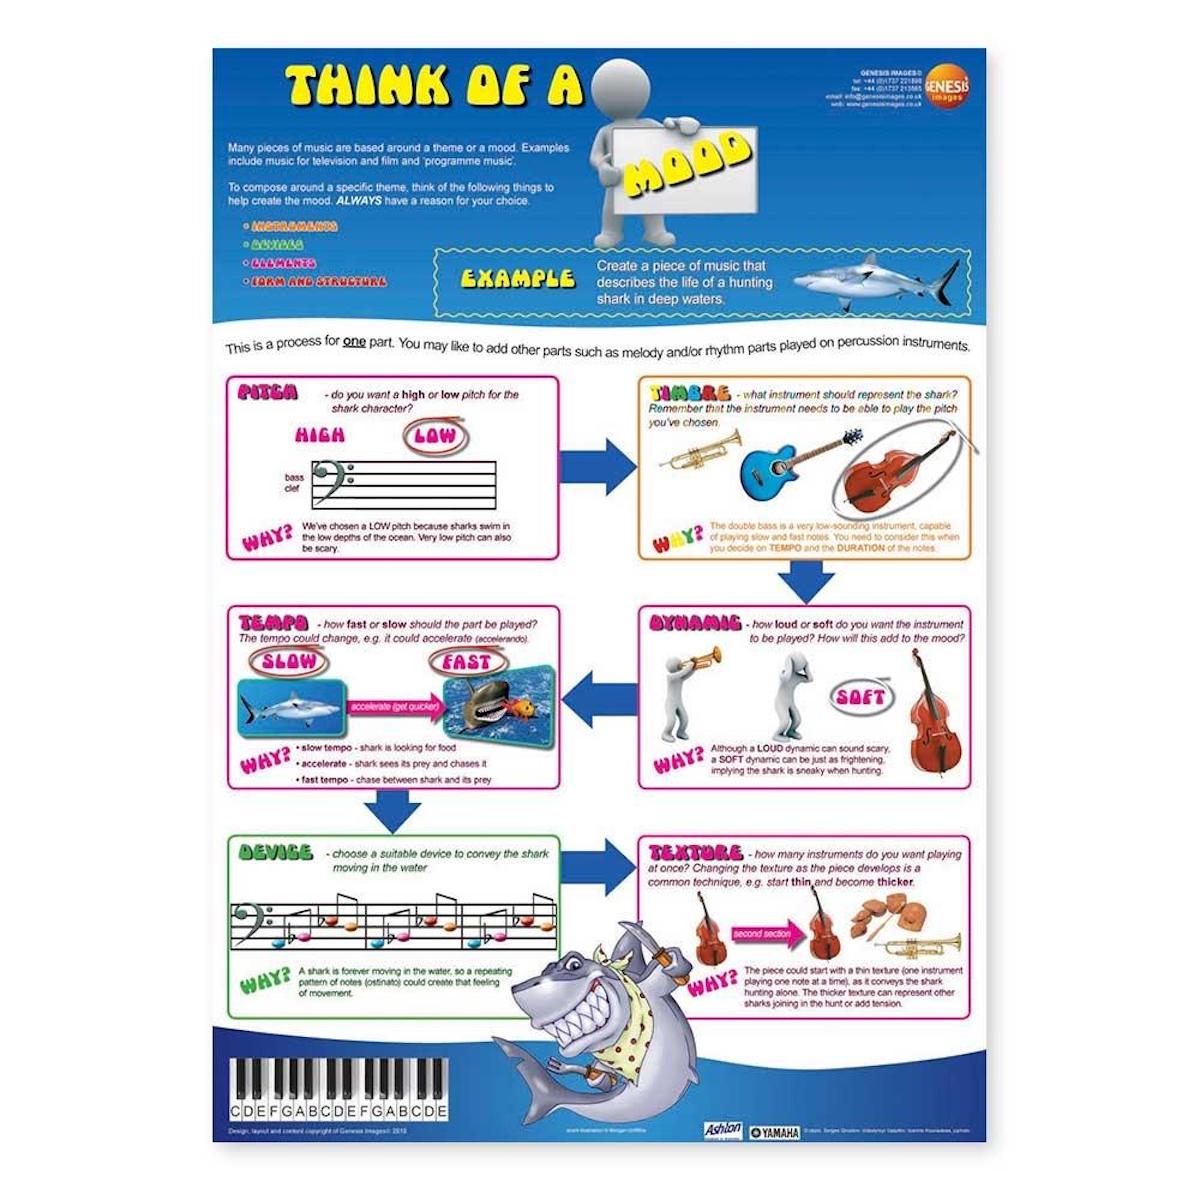 Think of Composing: Mood - A1 wall poster